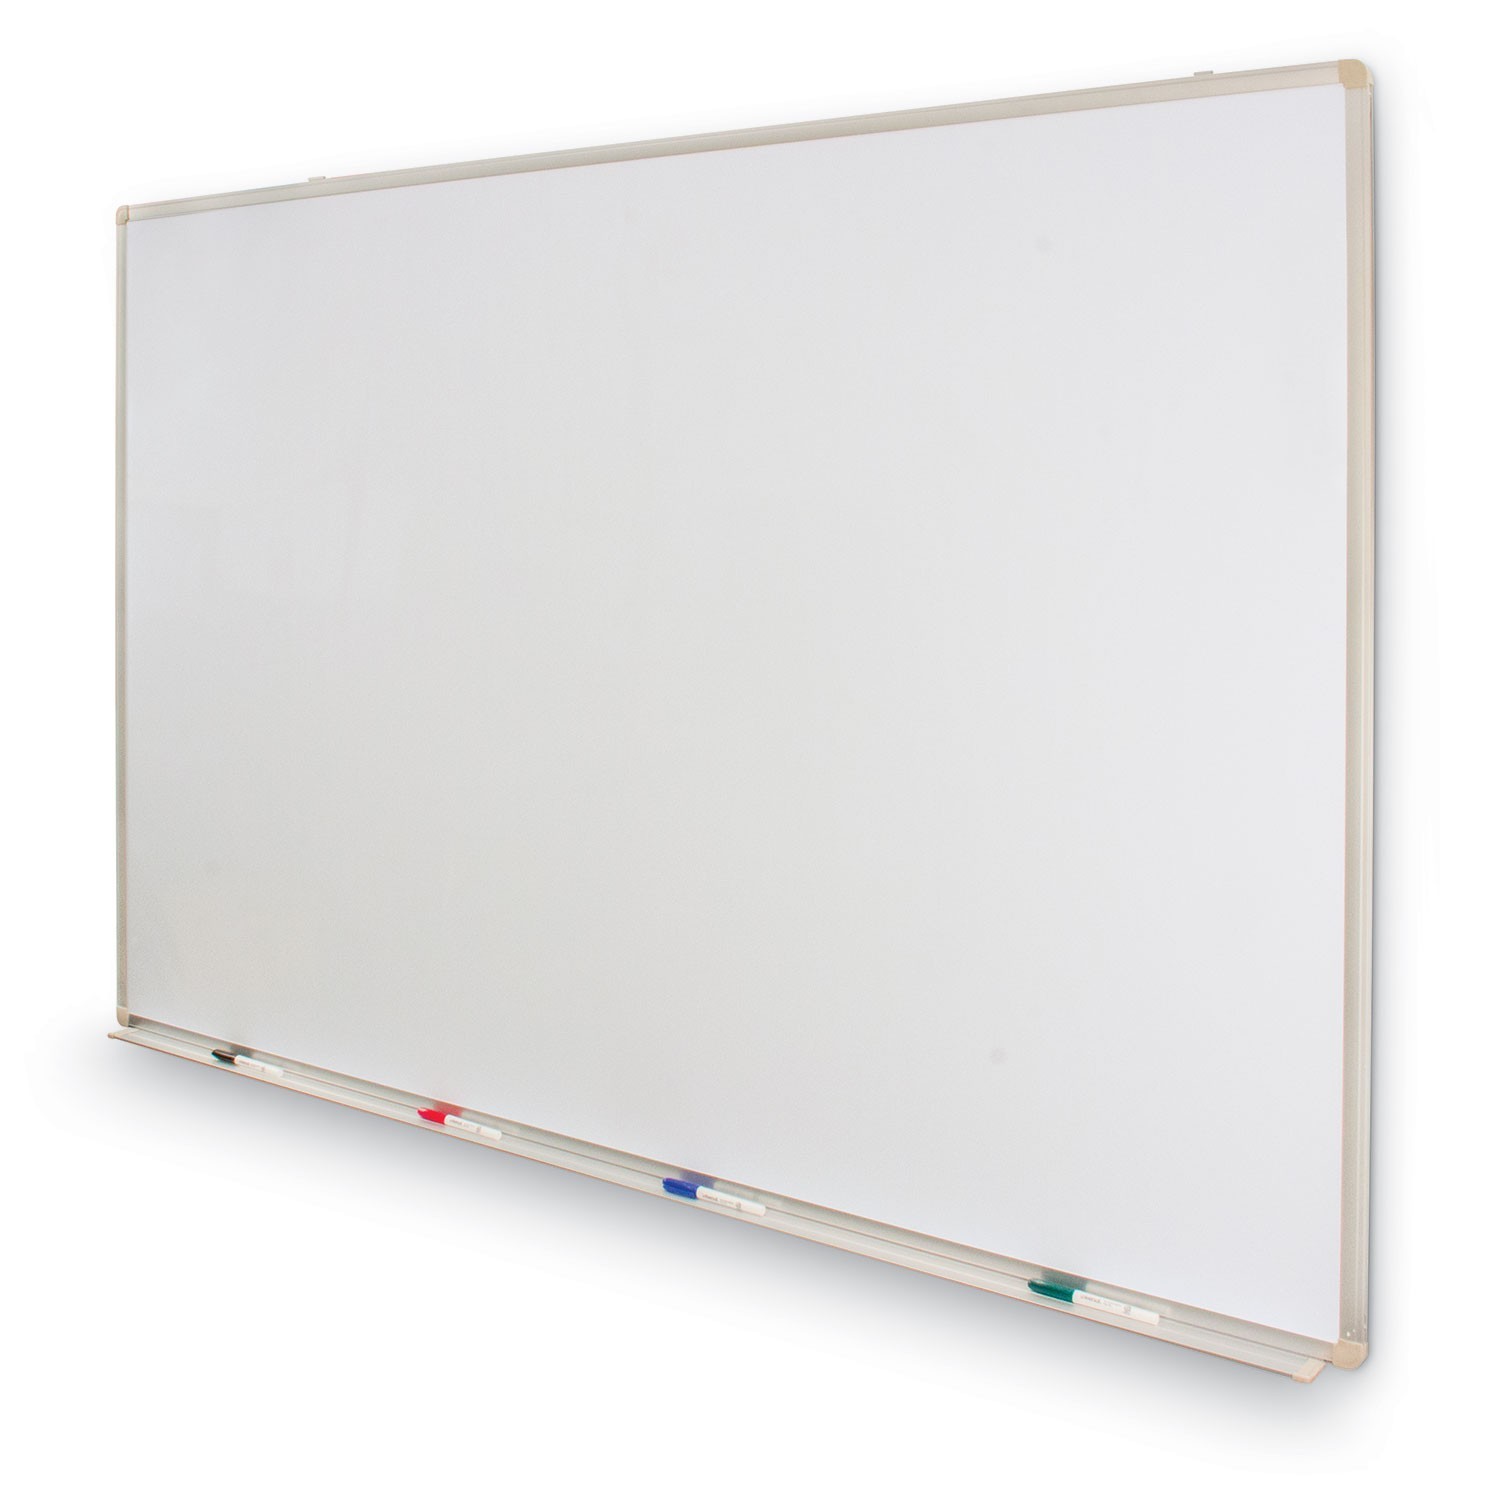 Magnetic Dry Erase Board with Marker Tray 4' x 6' (Light Duty)